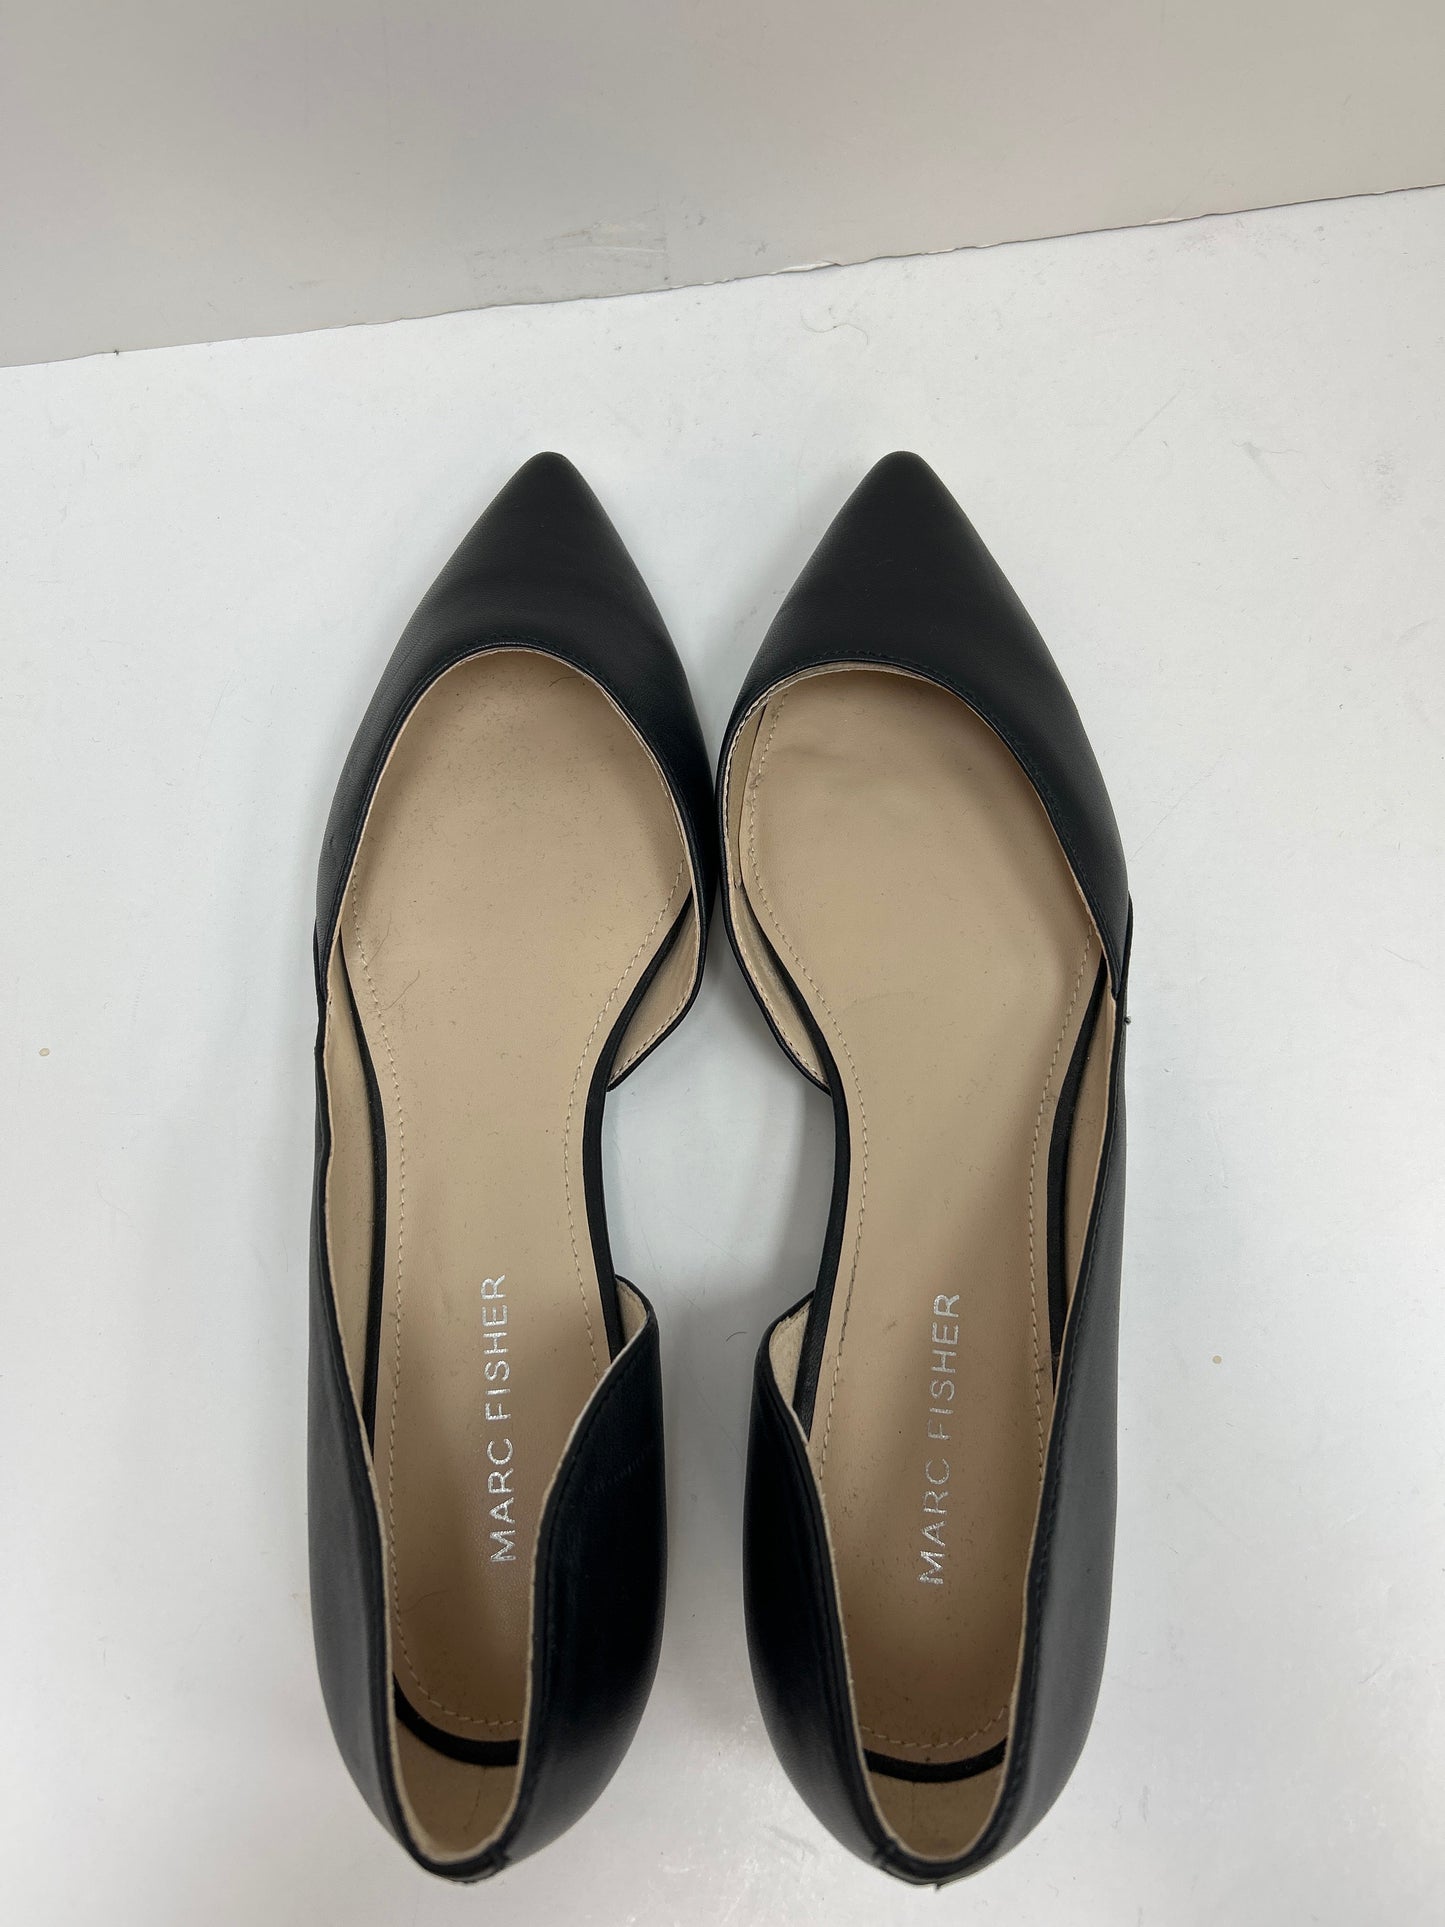 Shoes Flats Ballet By Marc Fisher  Size: 8